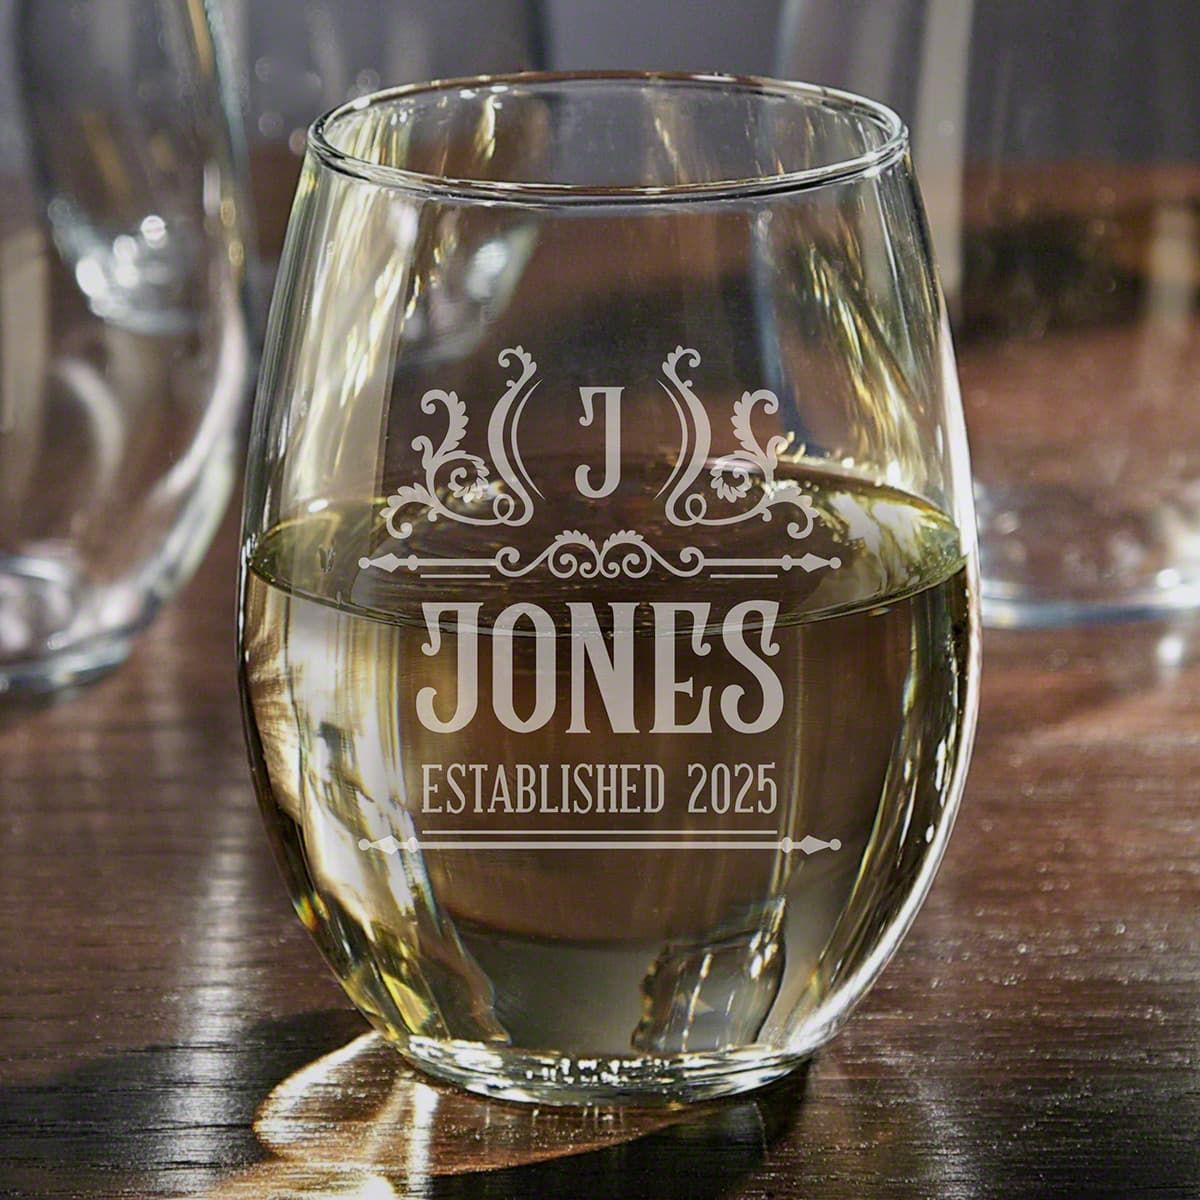 https://images.homewetbar.com/media/catalog/product/e/n/engraved-stemless-wine-glass-canterbury-design-p-10543.jpg?store=default&image-type=image